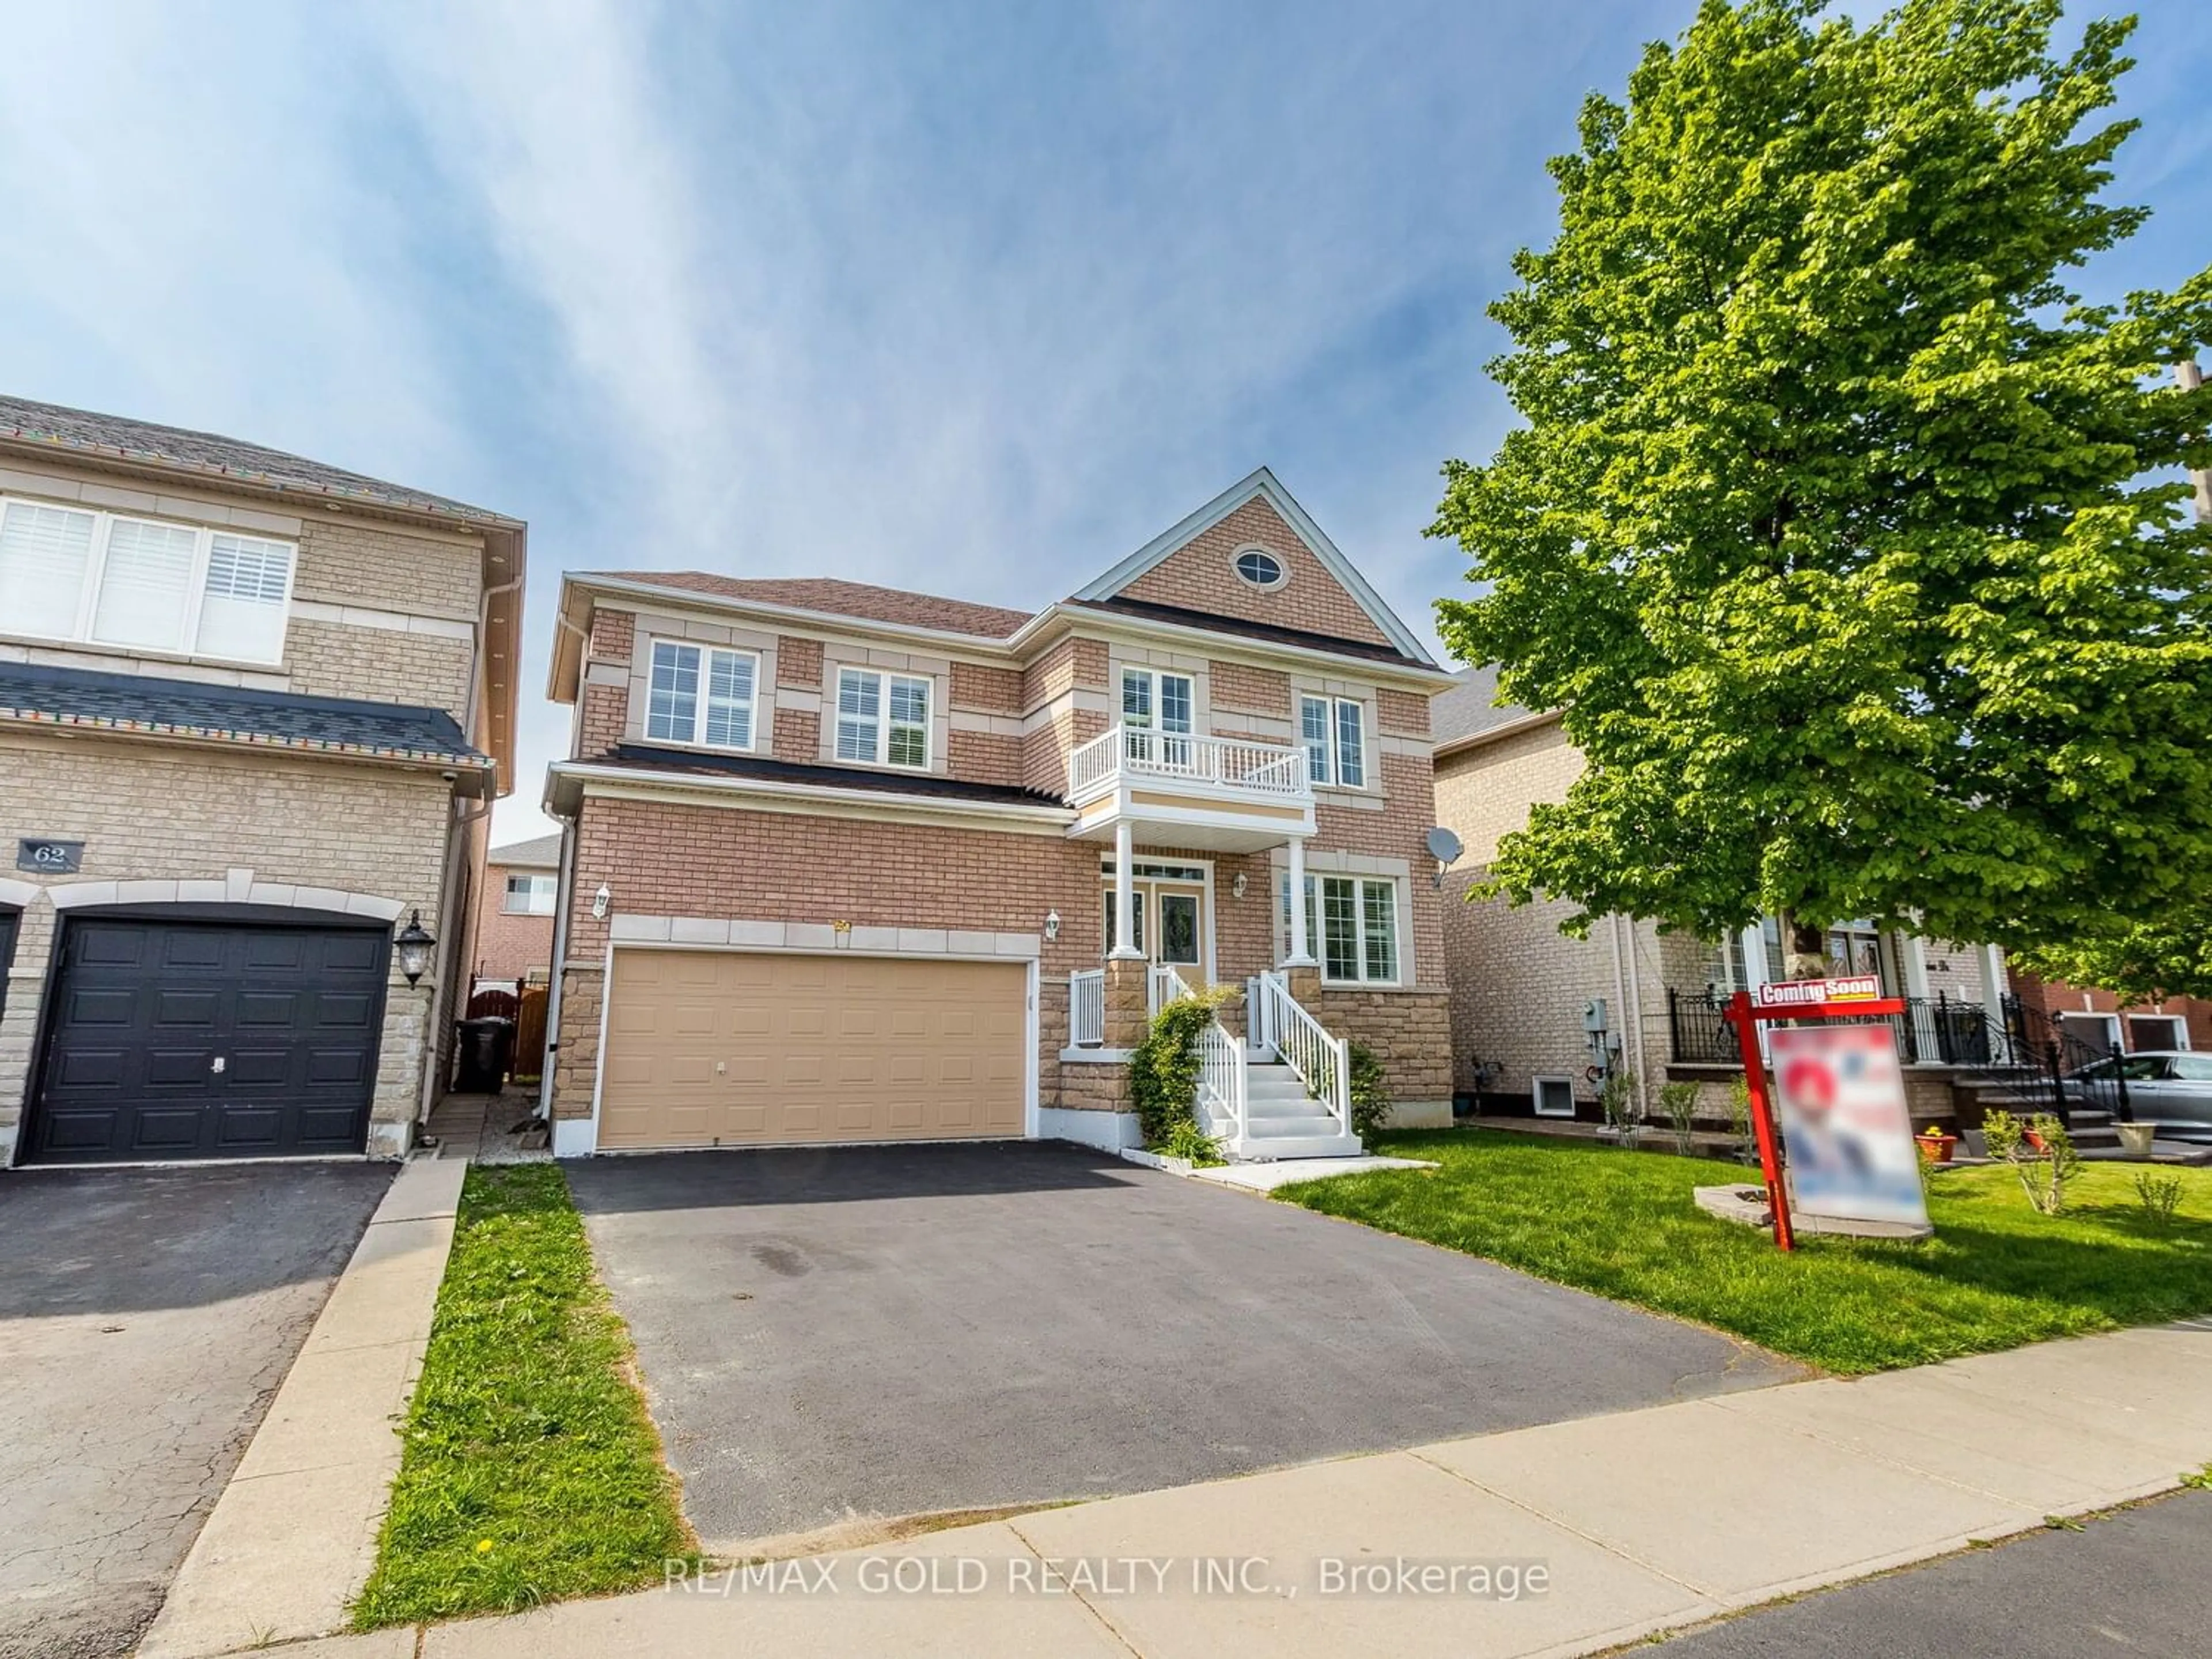 Frontside or backside of a home for 60 Eagle Plains Dr, Brampton Ontario L6R 2X8